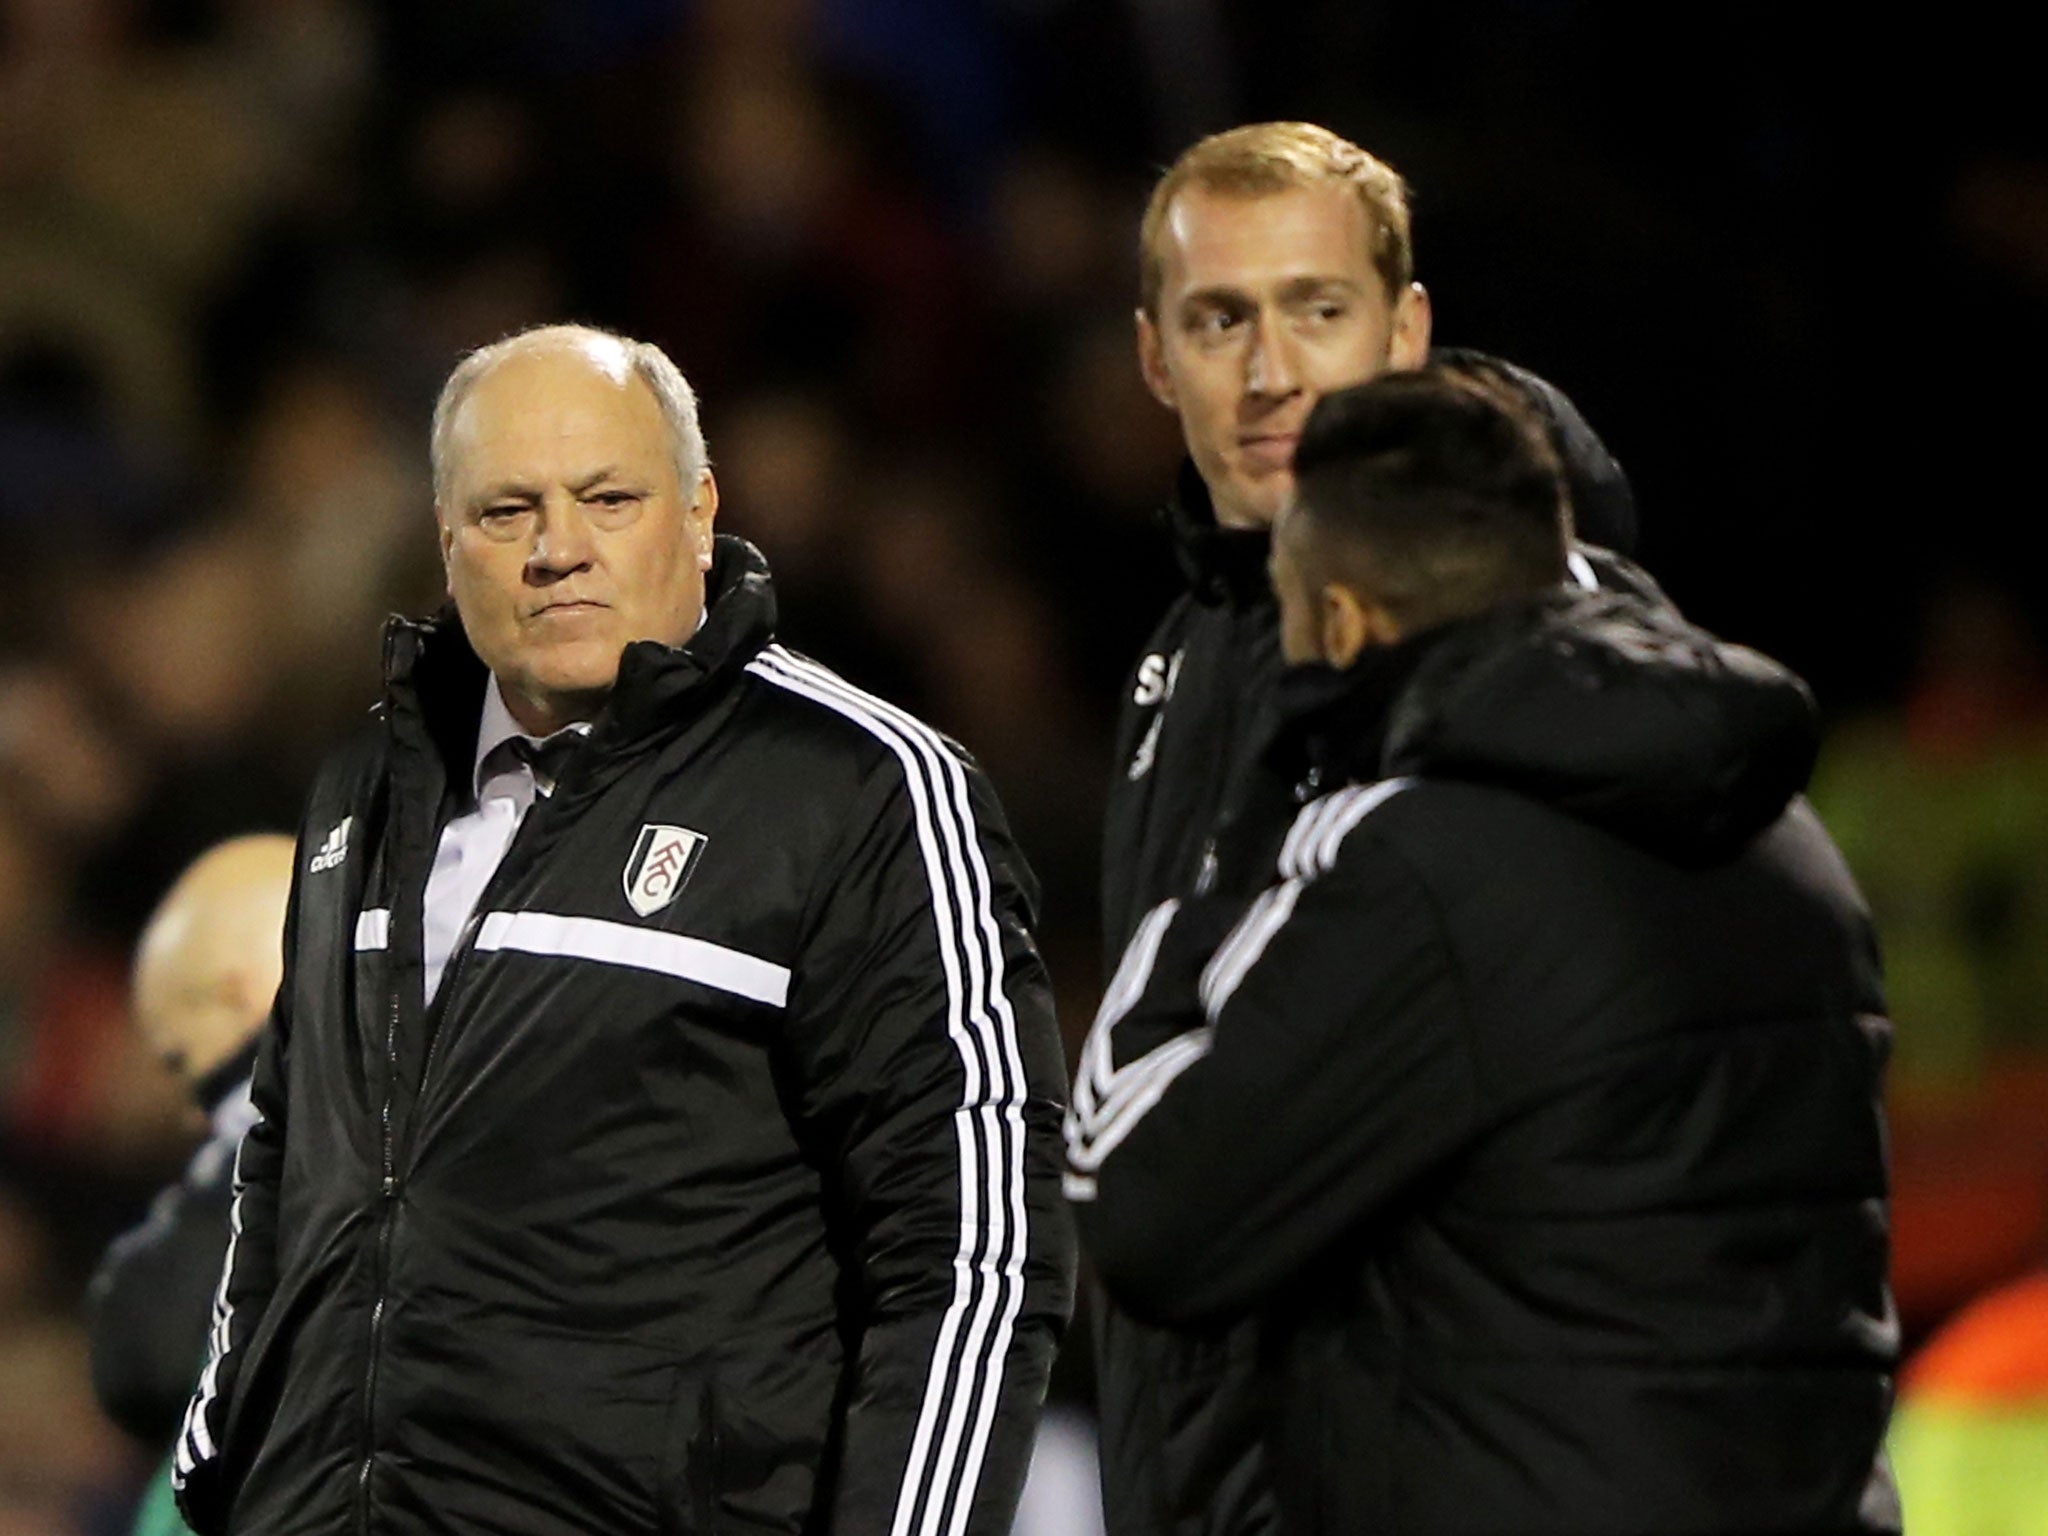 Martin Jol (left) walks off the pitch after Fulham's defeat to Swansea